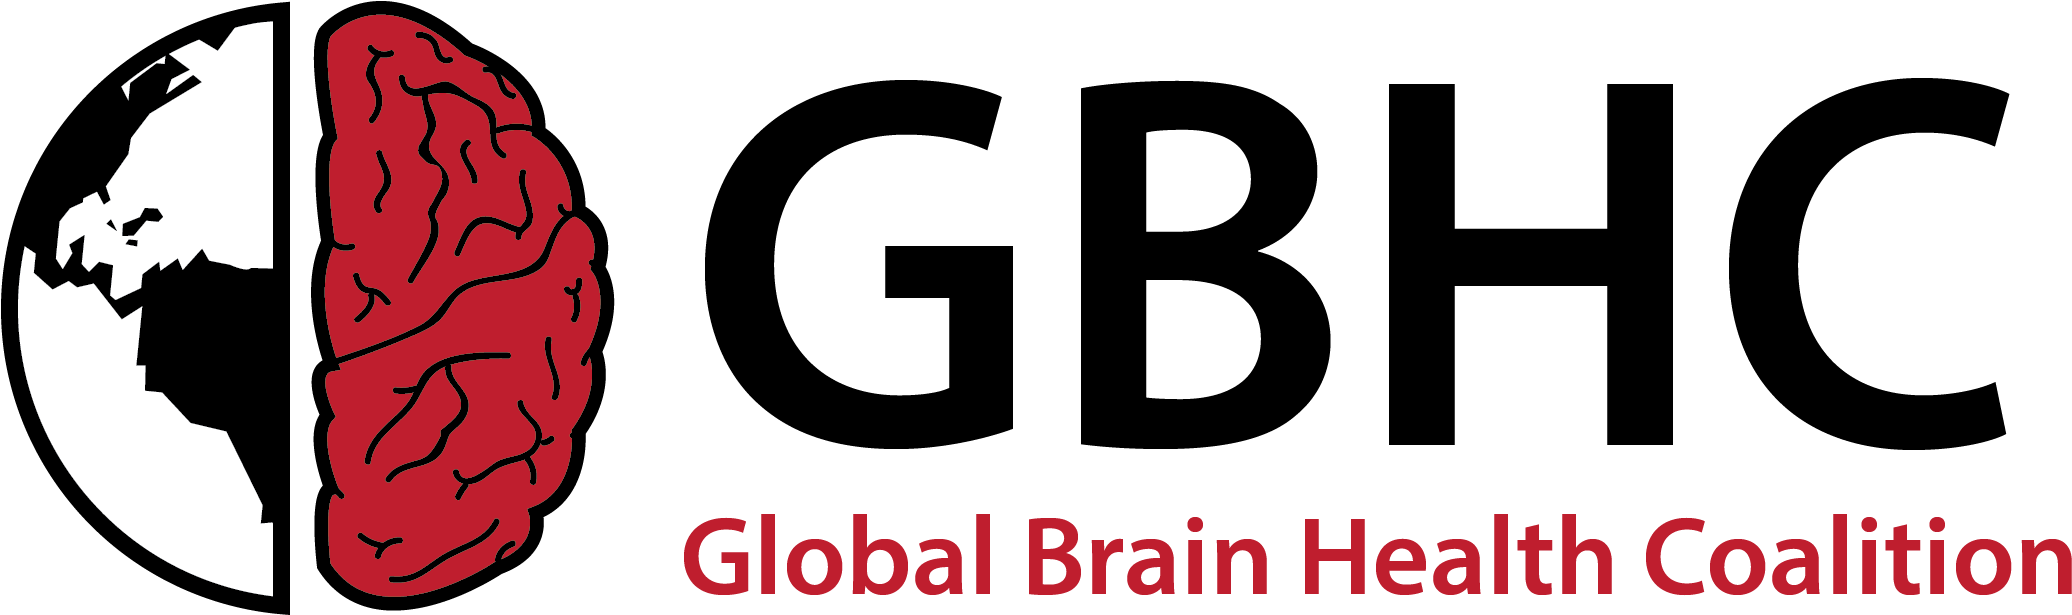 Gbhc Black Red Text - British Columbia (2078x625), Png Download